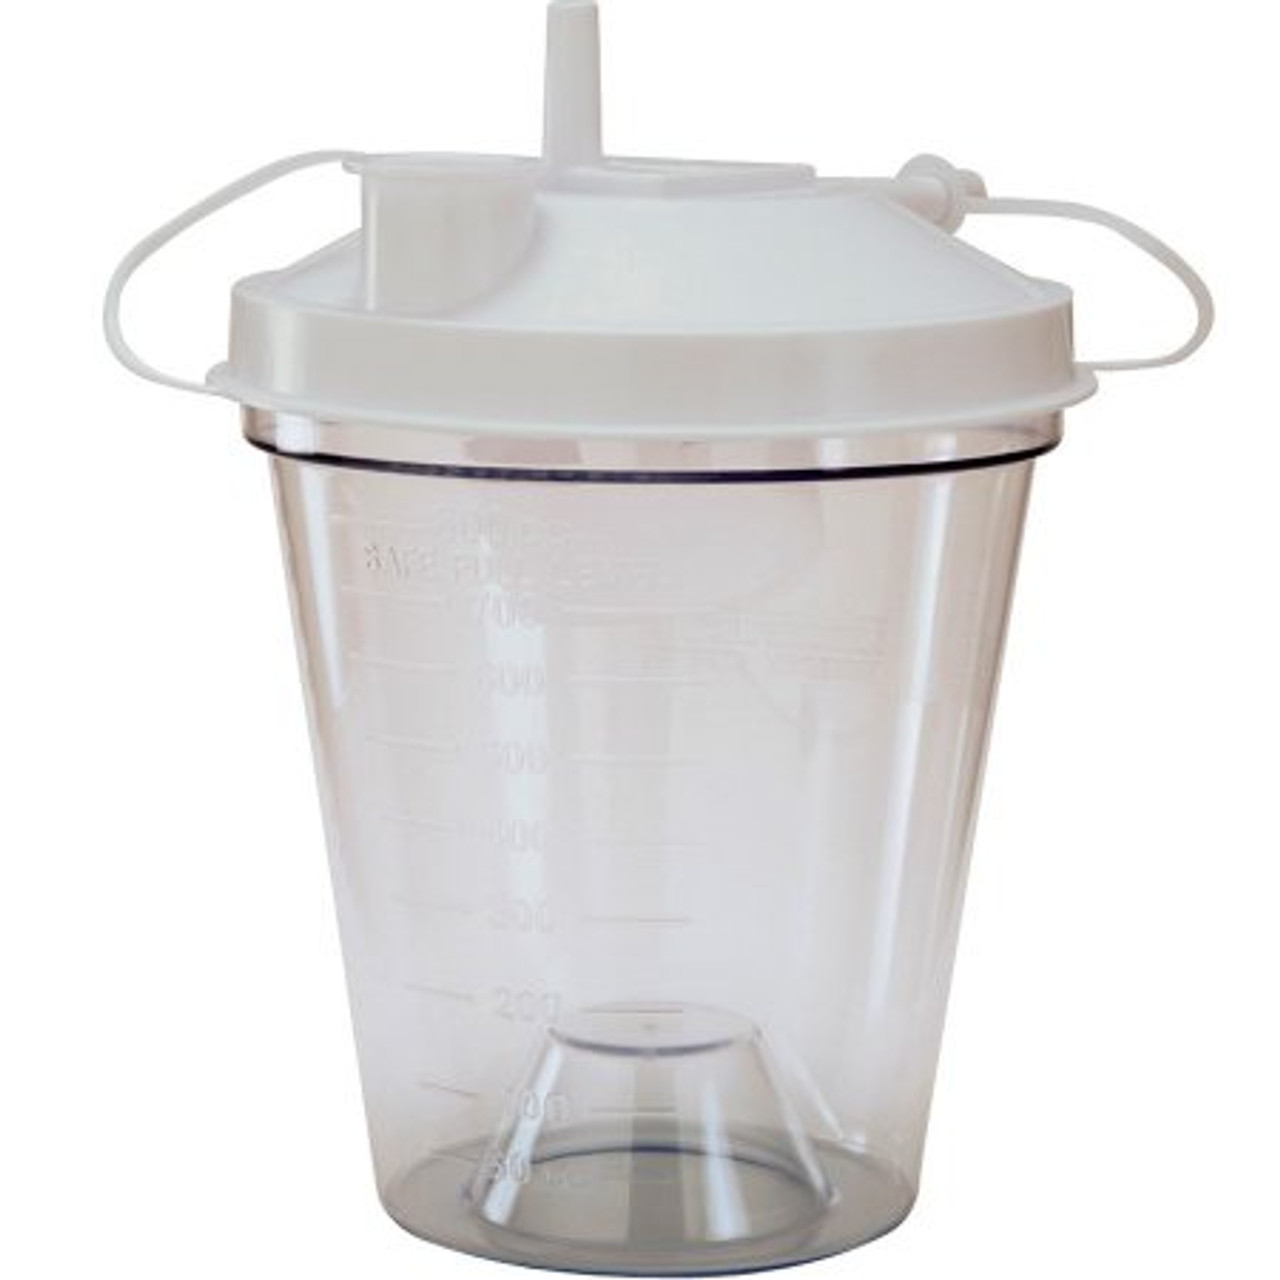 Case of 12 Disposable Suction Canister 800CC (610-12B)